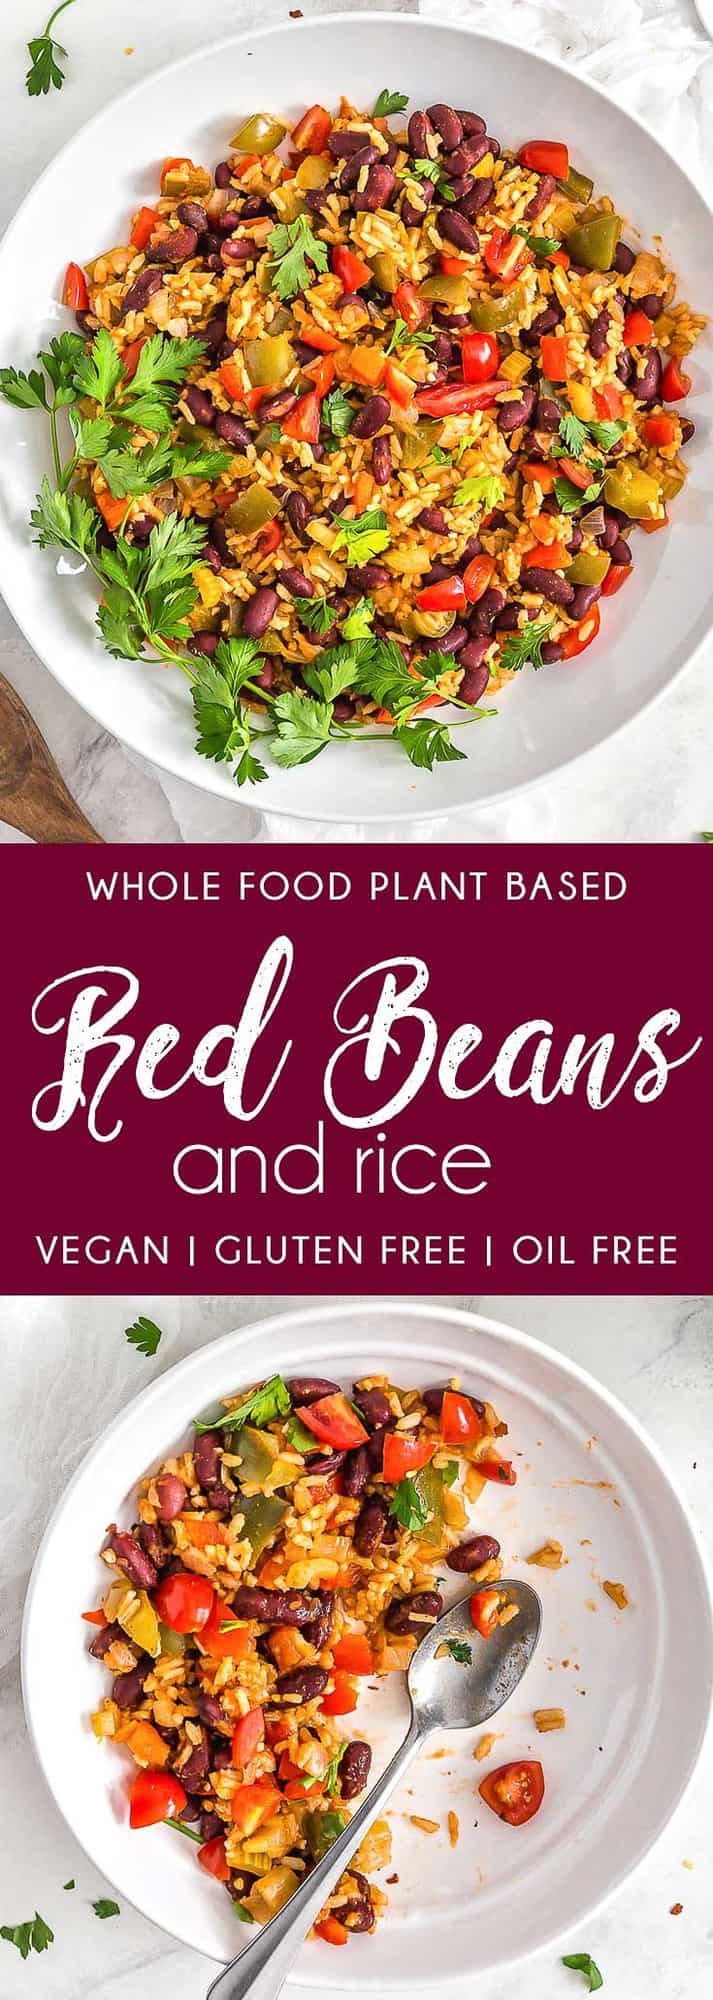 Red Beans and Rice, beans, rice, Cajun, Louisiana red beans and rice, plant based, vegan, vegetarian, whole food plant based, gluten free, recipe, wfpb, healthy, healthy vegan, oil free, no refined sugar, no oil, refined sugar free, dairy free, dinner, lunch, veggies